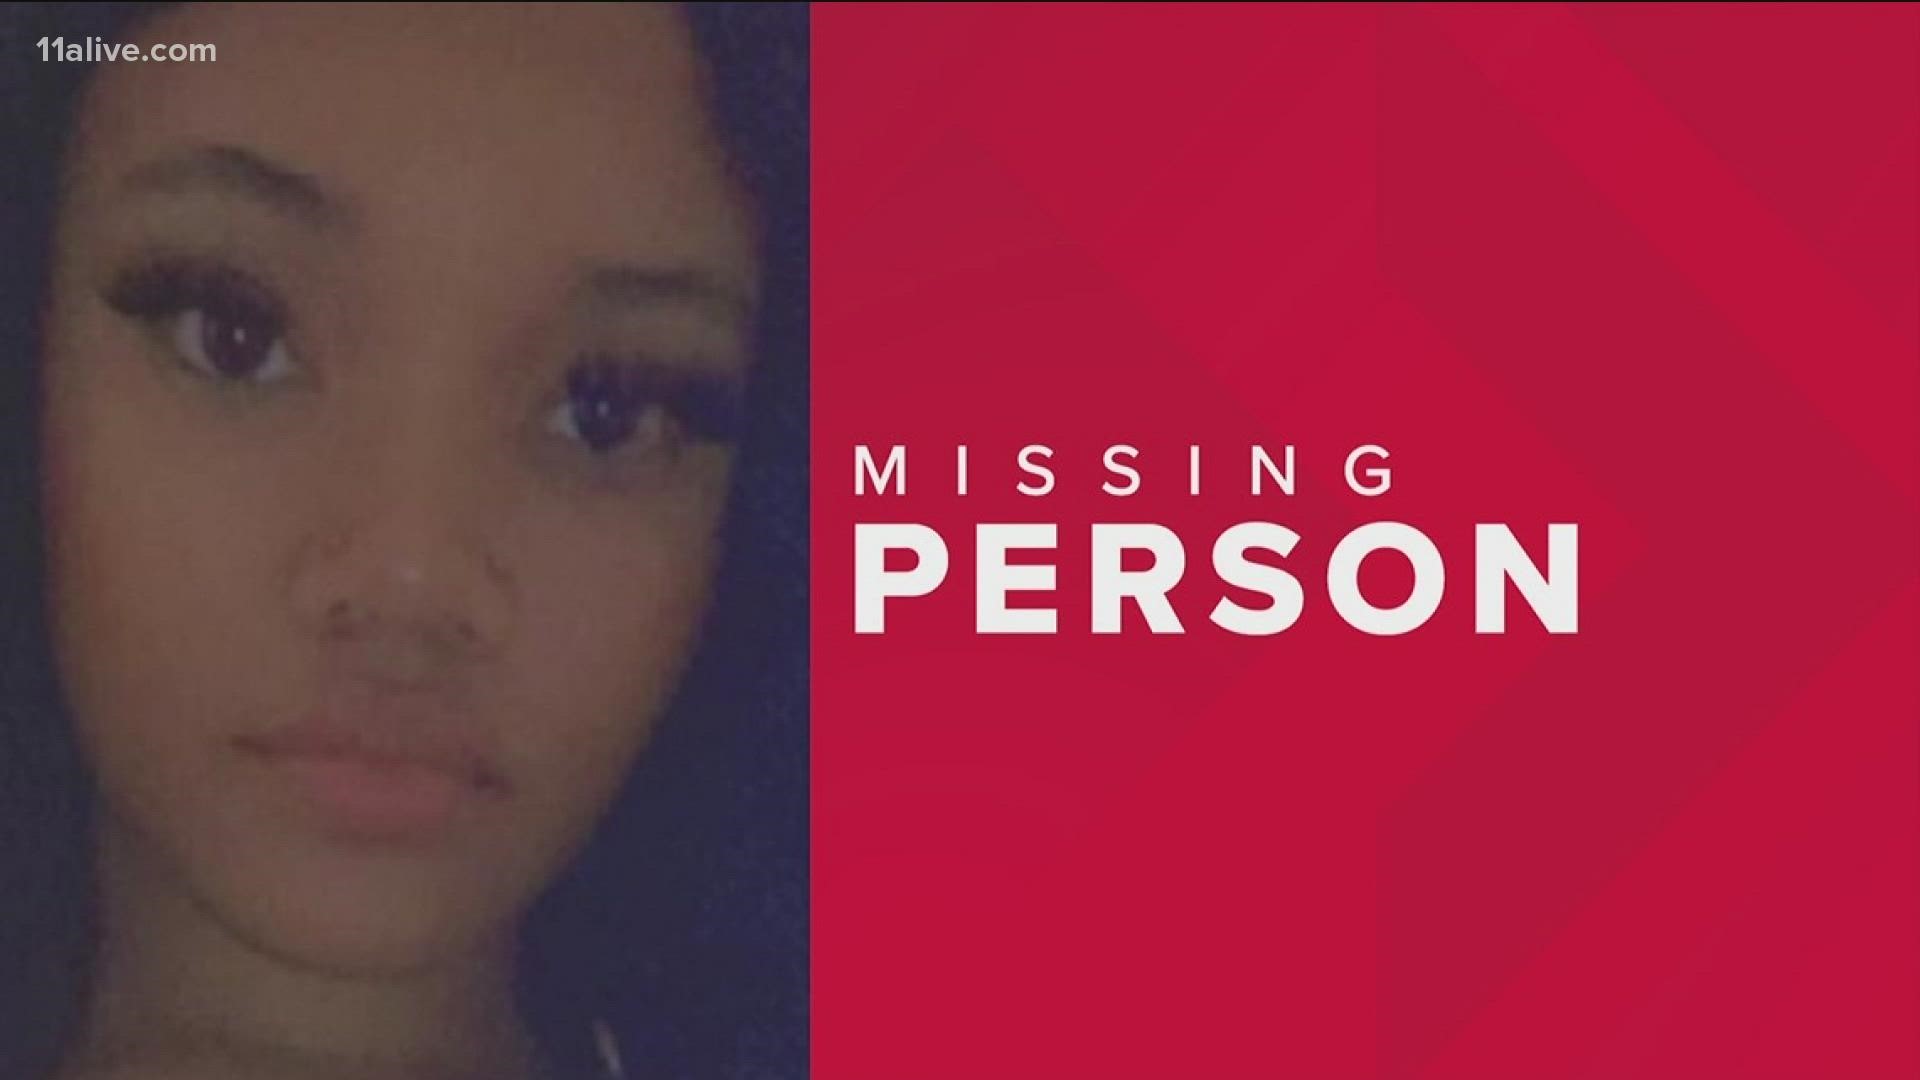 The Clayton County Police has reported a teenager missing. Anyone with information should call (770) 477-3747.